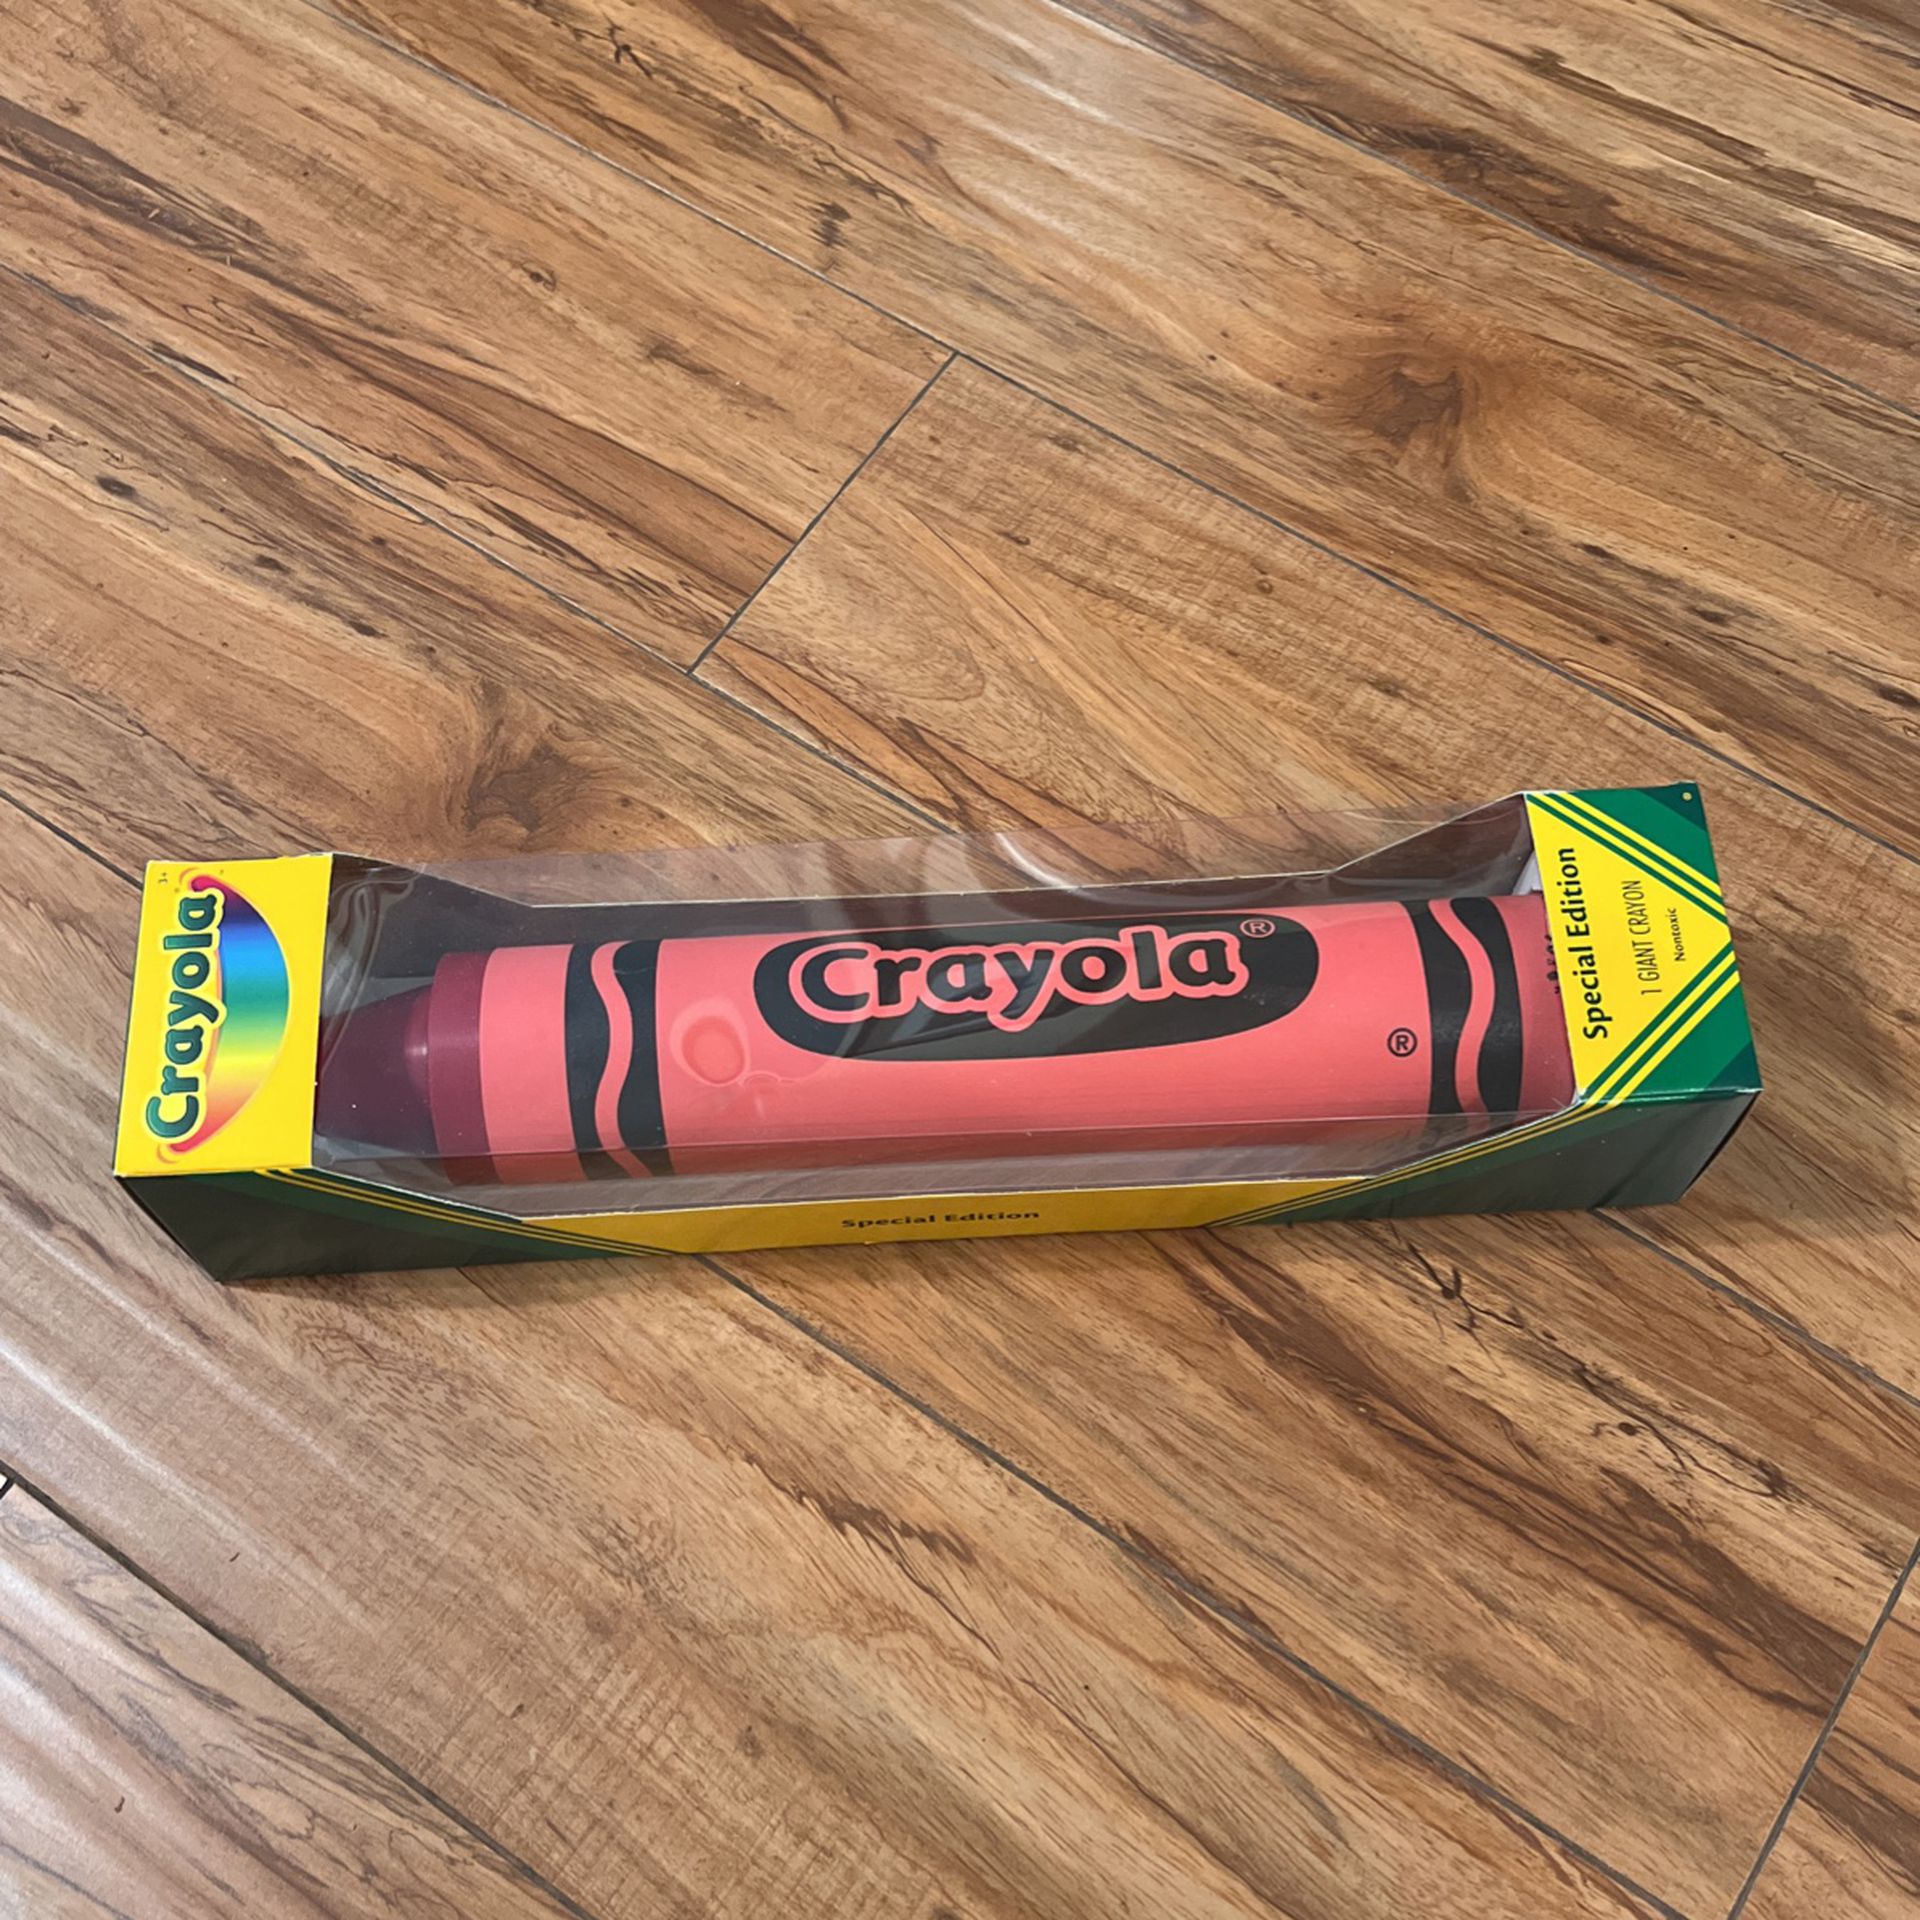 Special Edition Giant Crayola Crayon for Sale in Las Vegas, NV - OfferUp